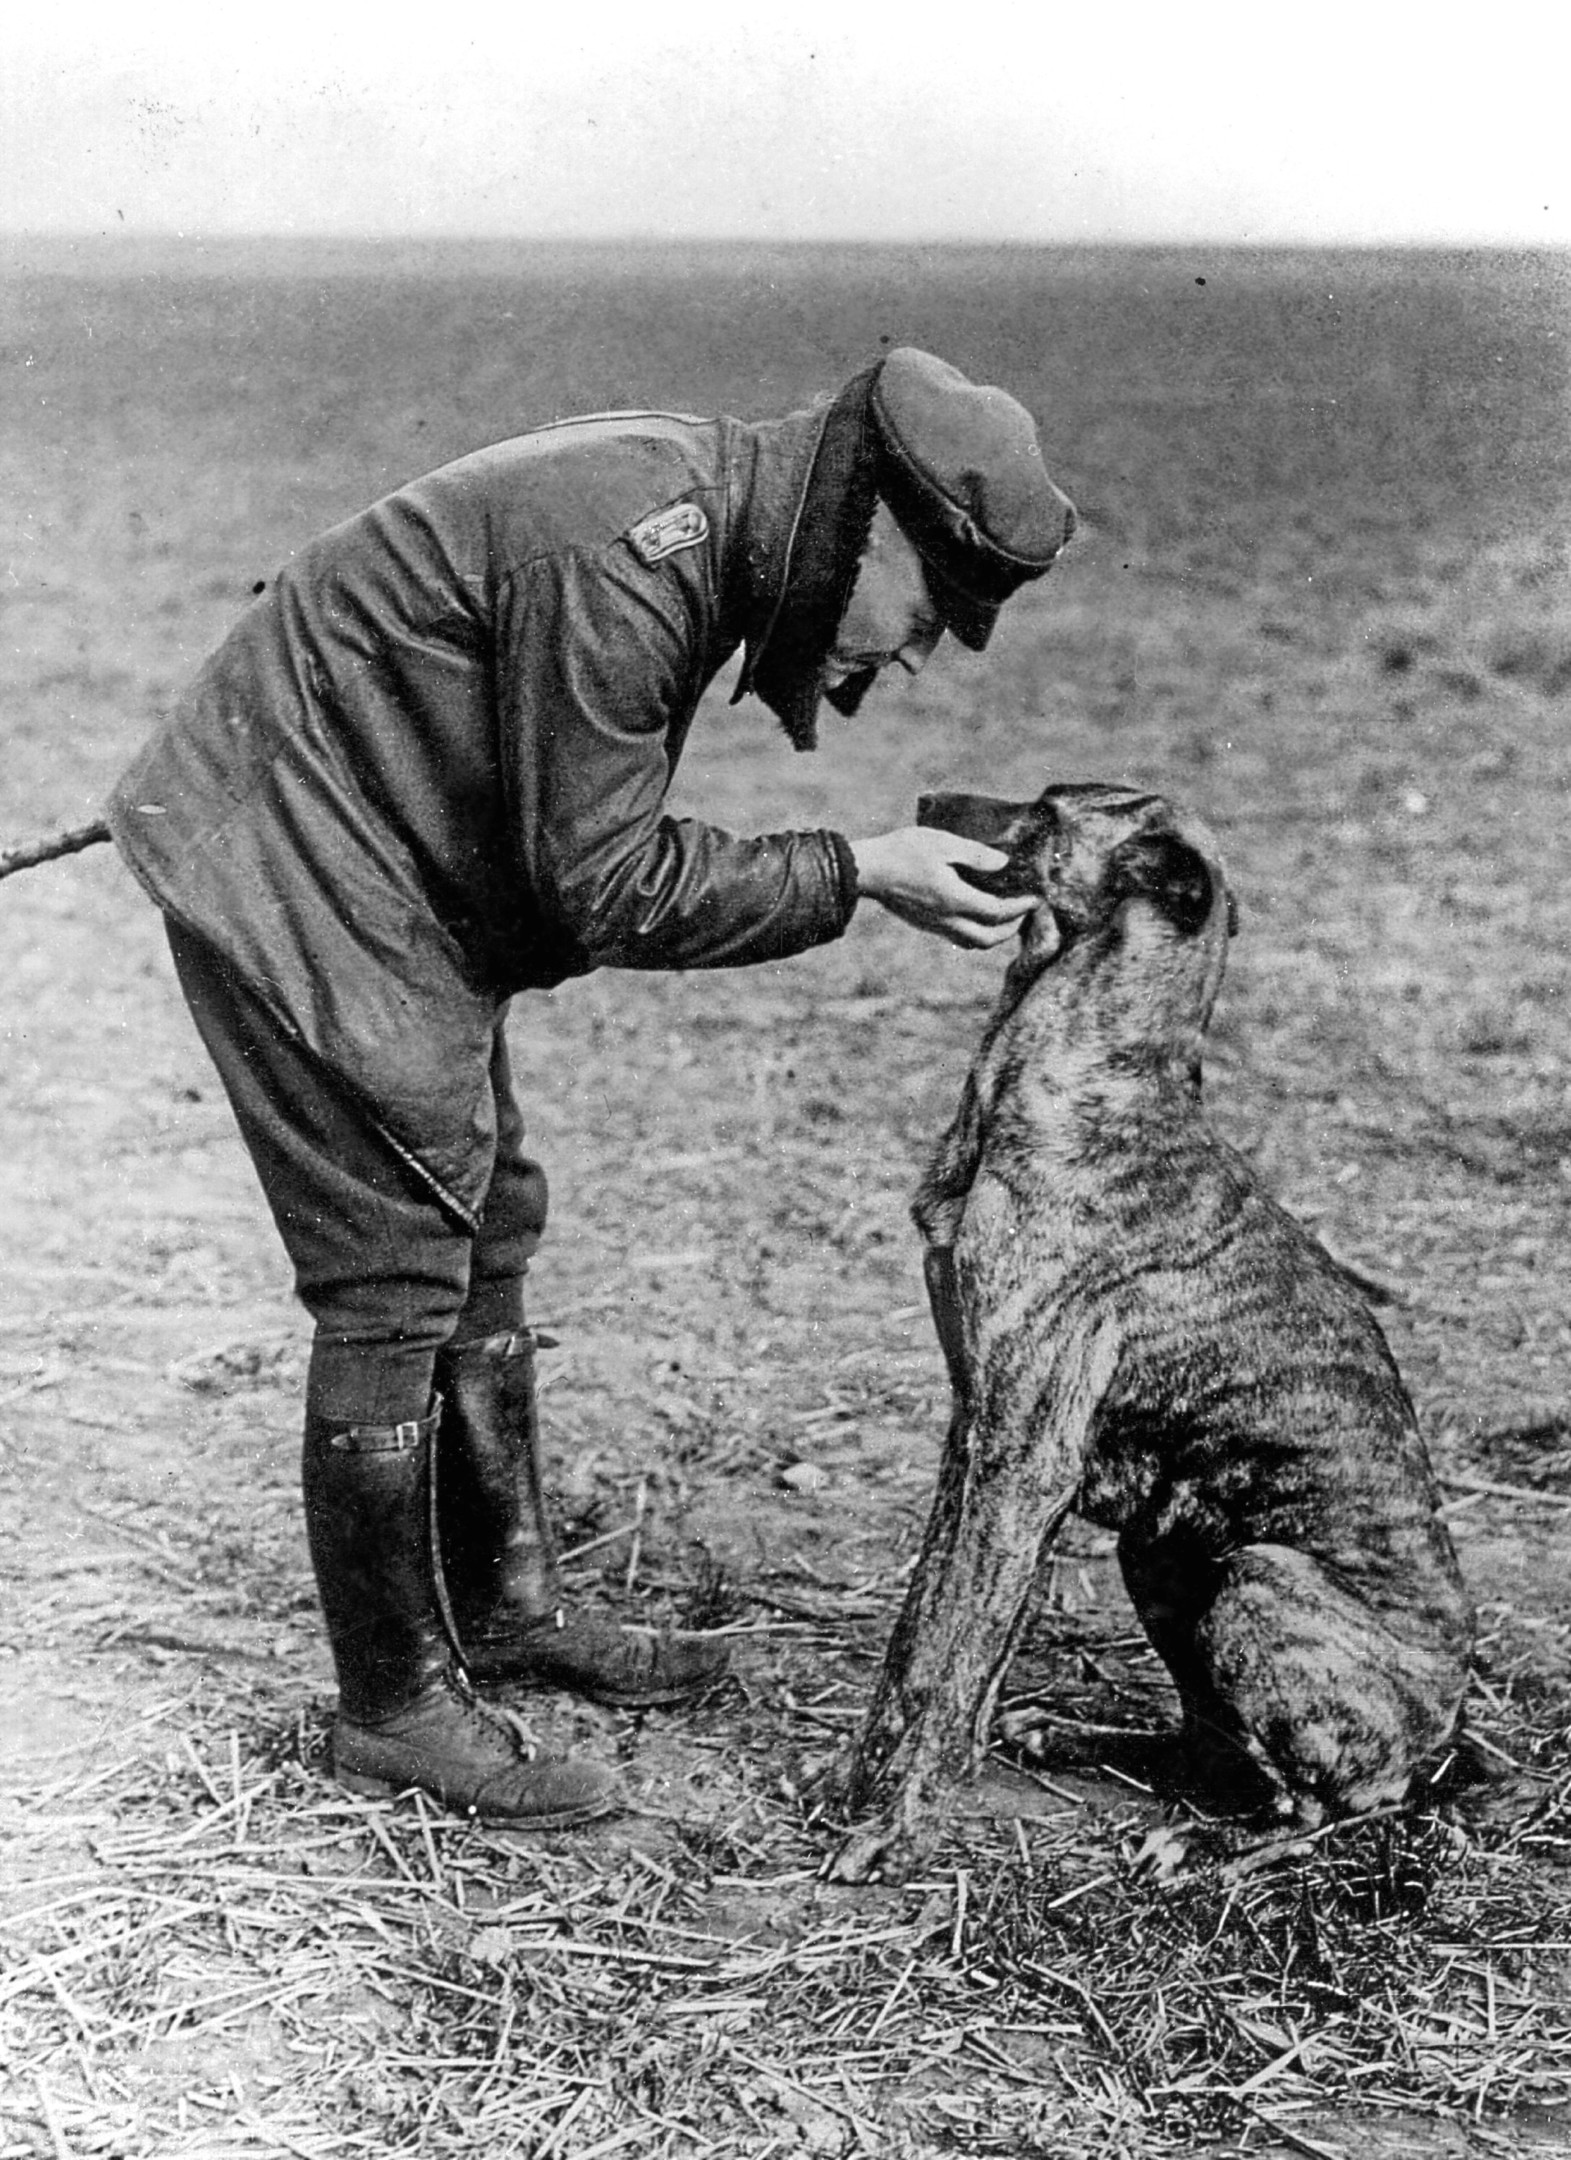 German flying ace Baron Manfred von Richthofen (1892 - 1918) also known as The Red Baron with his dog Moritz (Photo by Spencer Arnold/Getty Images)